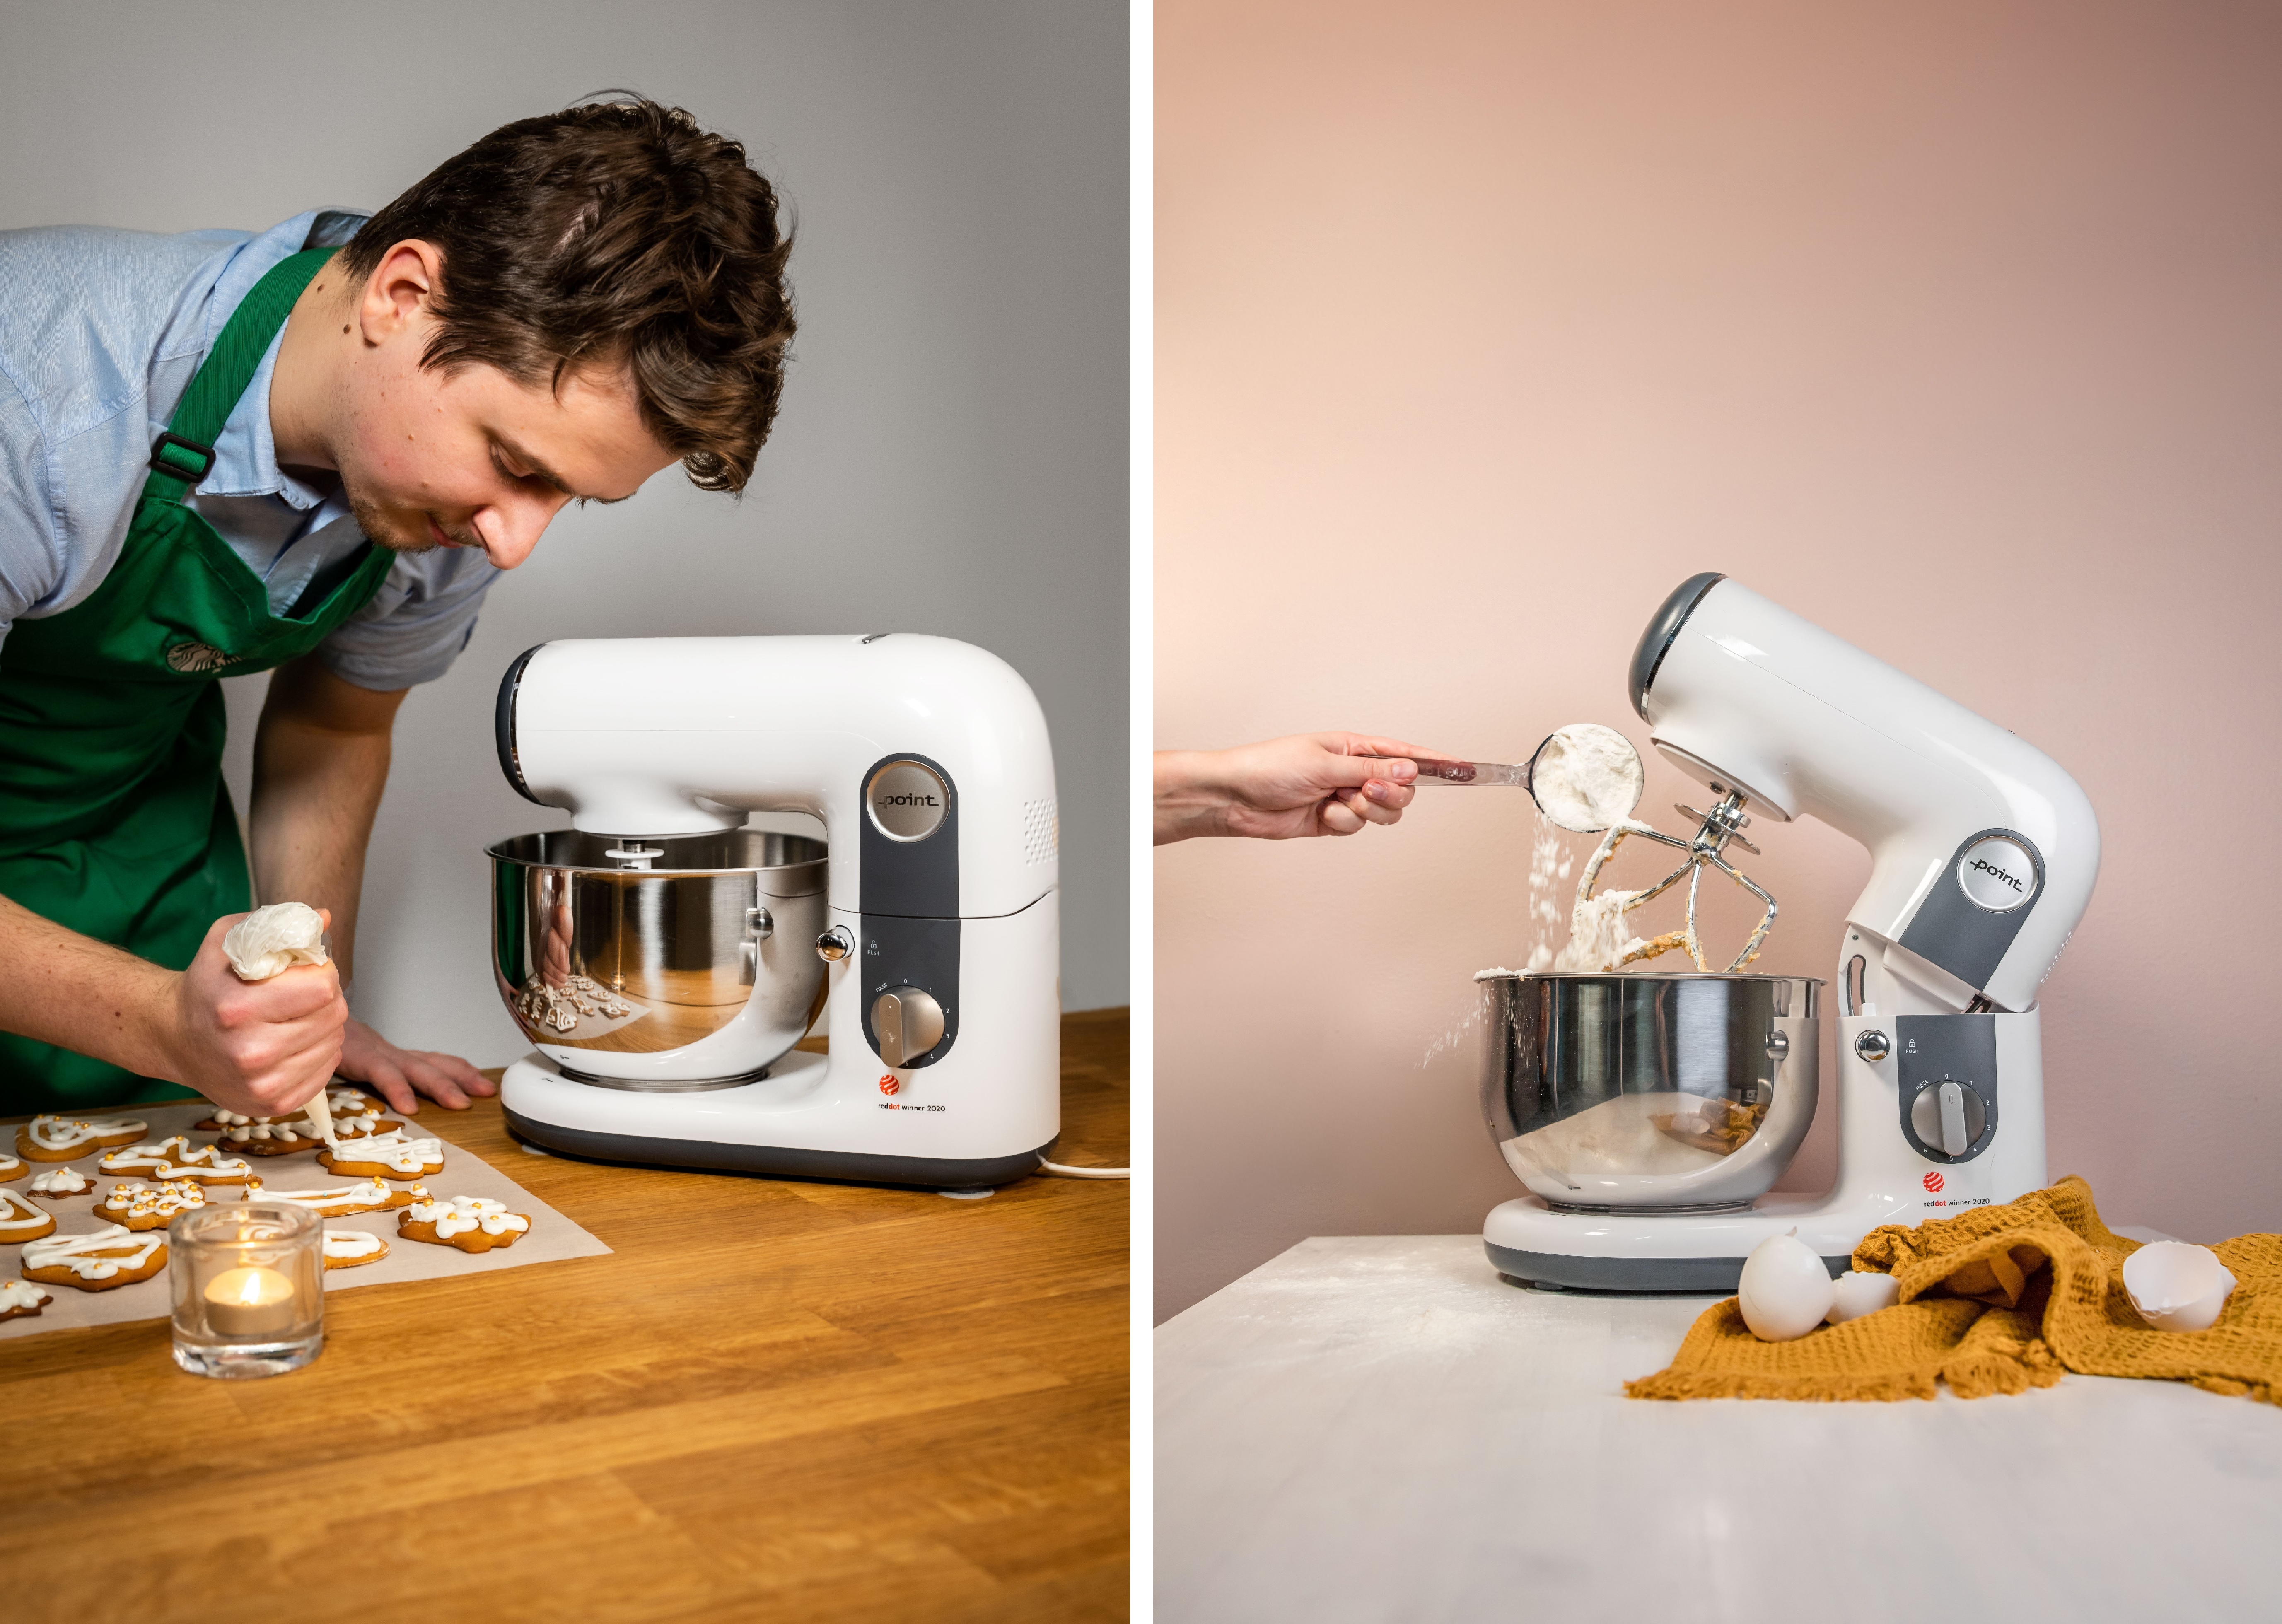 Two pictures of a white stand mixer with a man decorating ginger cookies and the mixer on a table with a hand putting flour in it